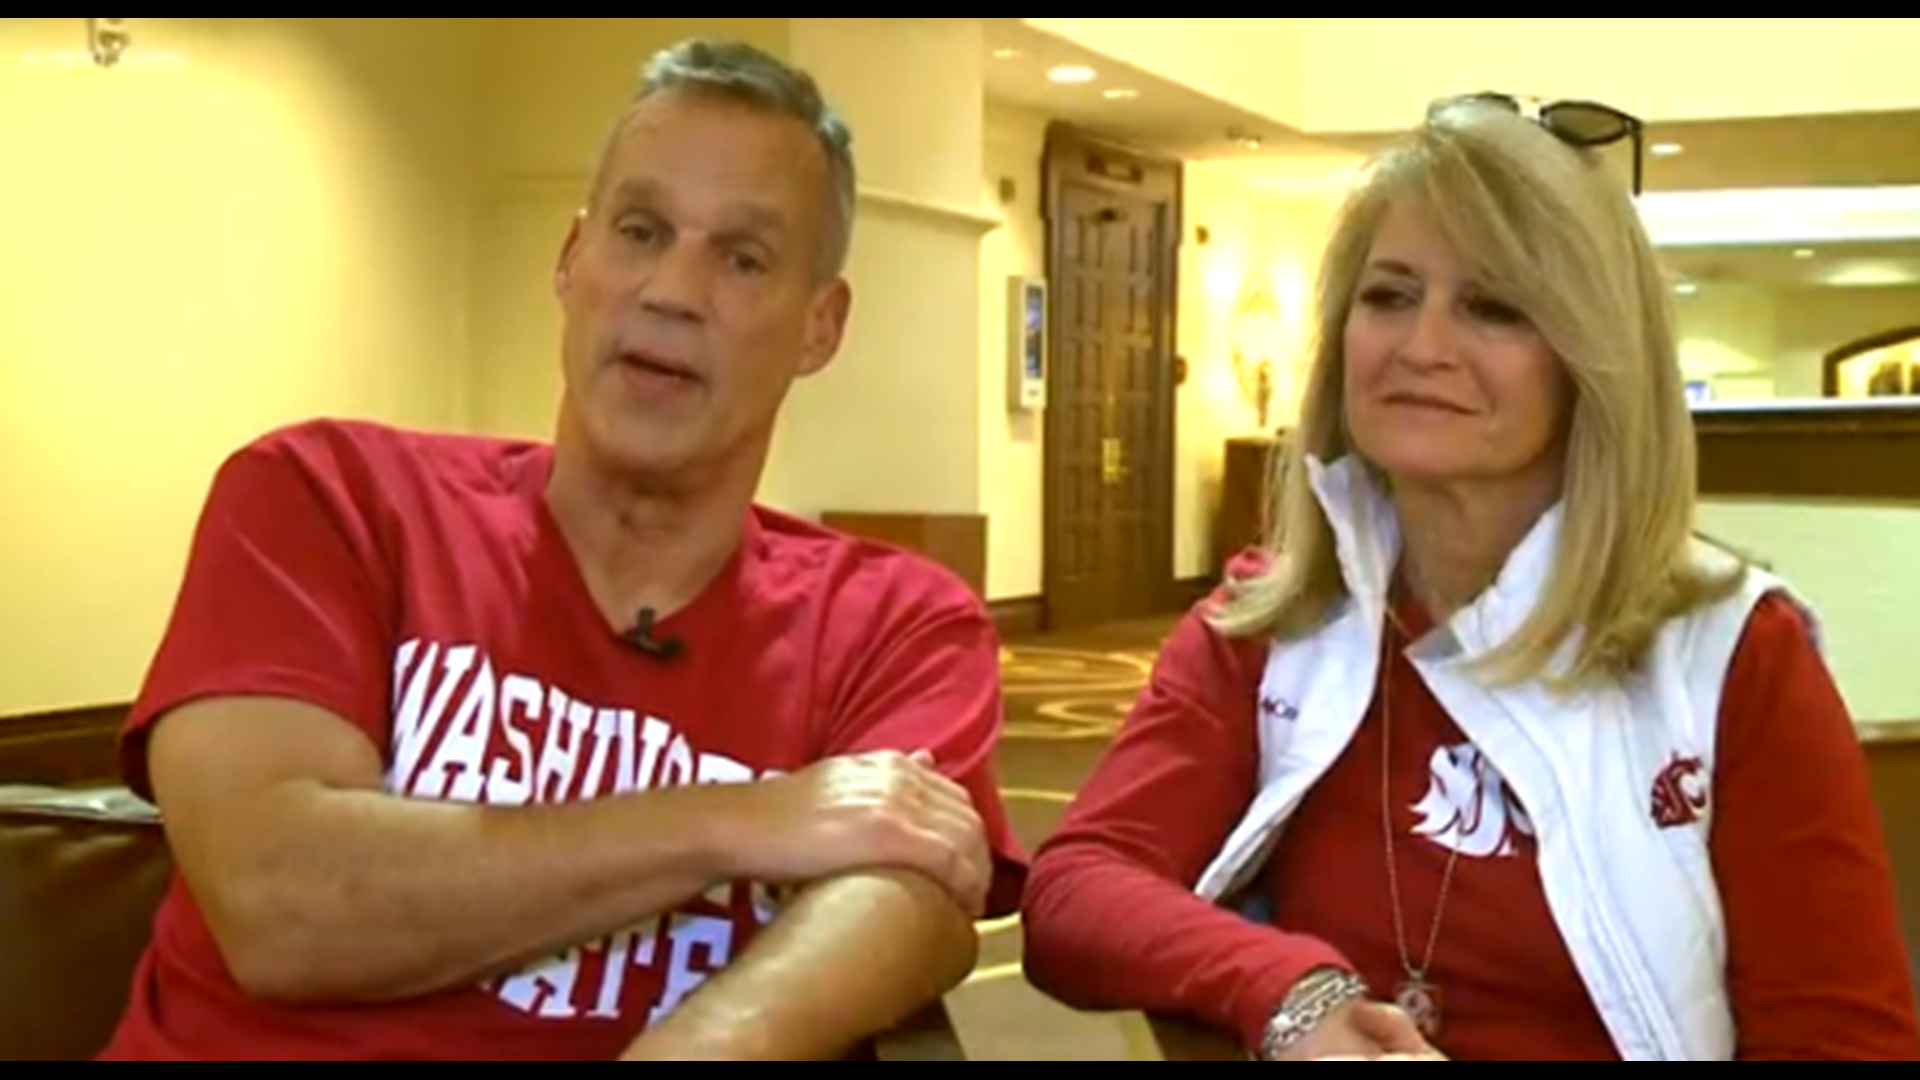 Friday also marks the last time Peyton’s mom and dad, Kim and Scott Pelluer, will see their son don a Cougs jersey.